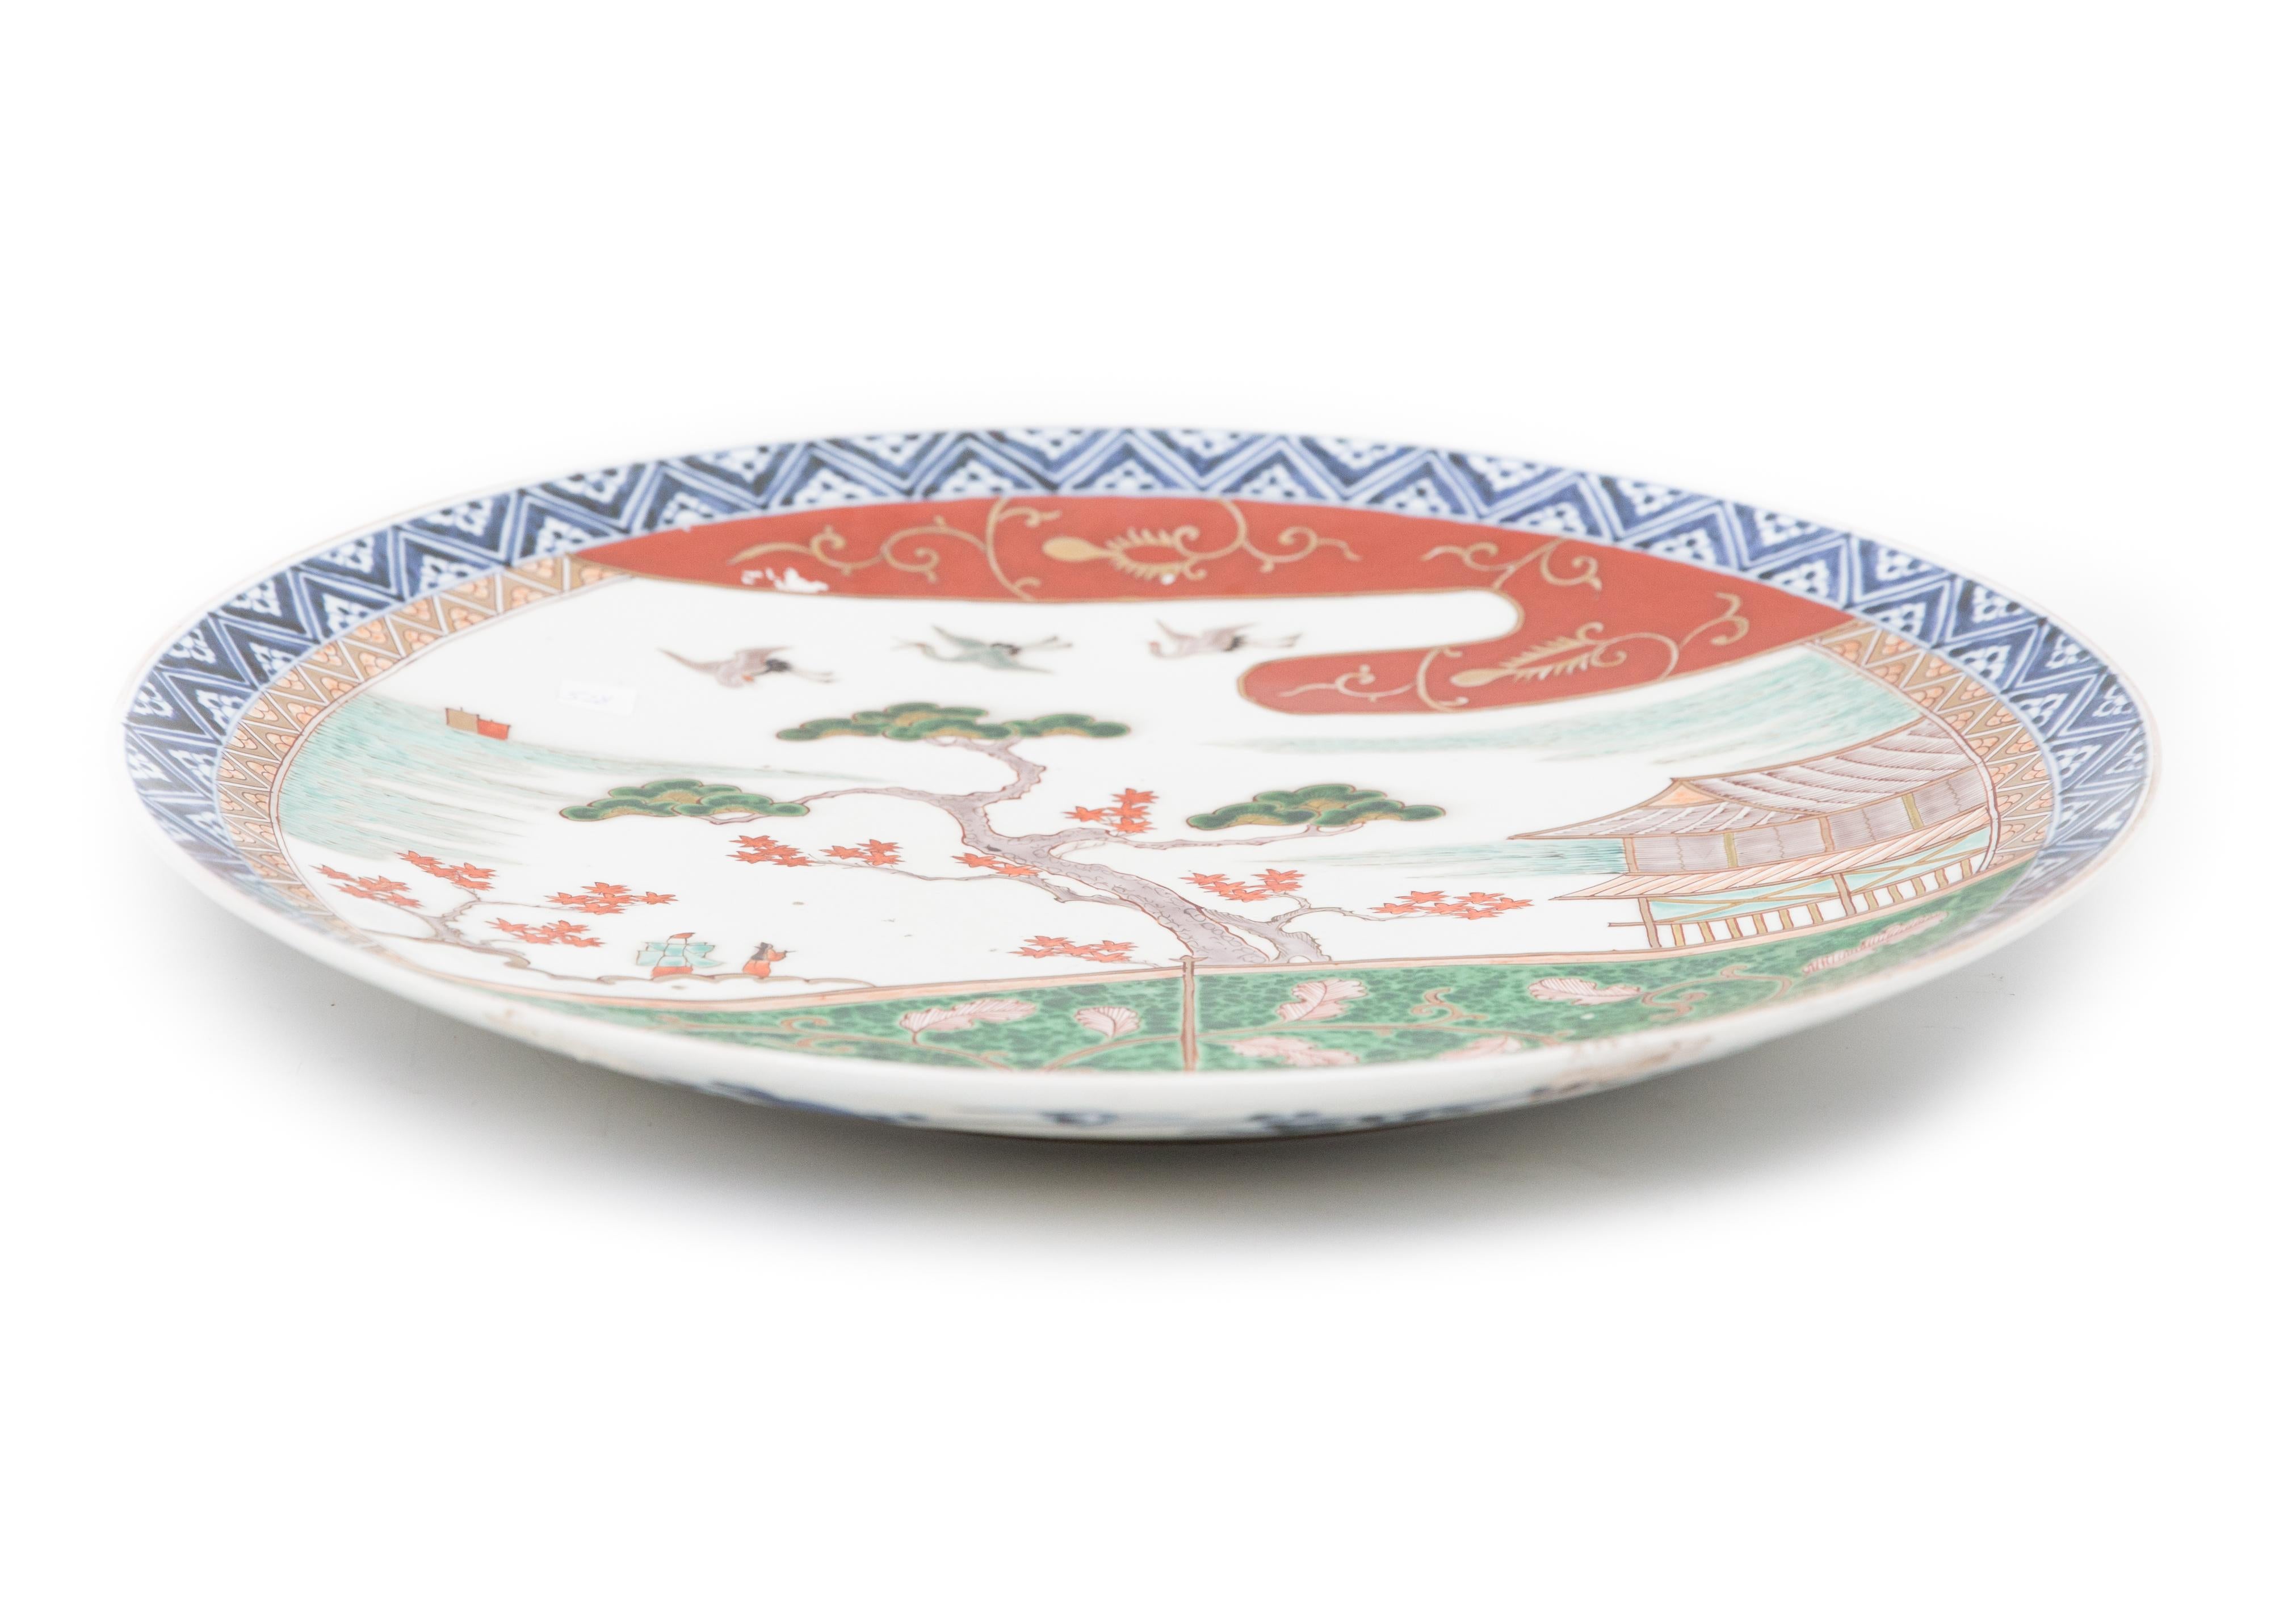 Offered is a large circa 1900 Japanese hand painted Imari ceramic charger. The piece is in good condition with two small areas where the red pigment glaze did not properly adhere to the substrate. The piece is large and measures 22” in diameter.